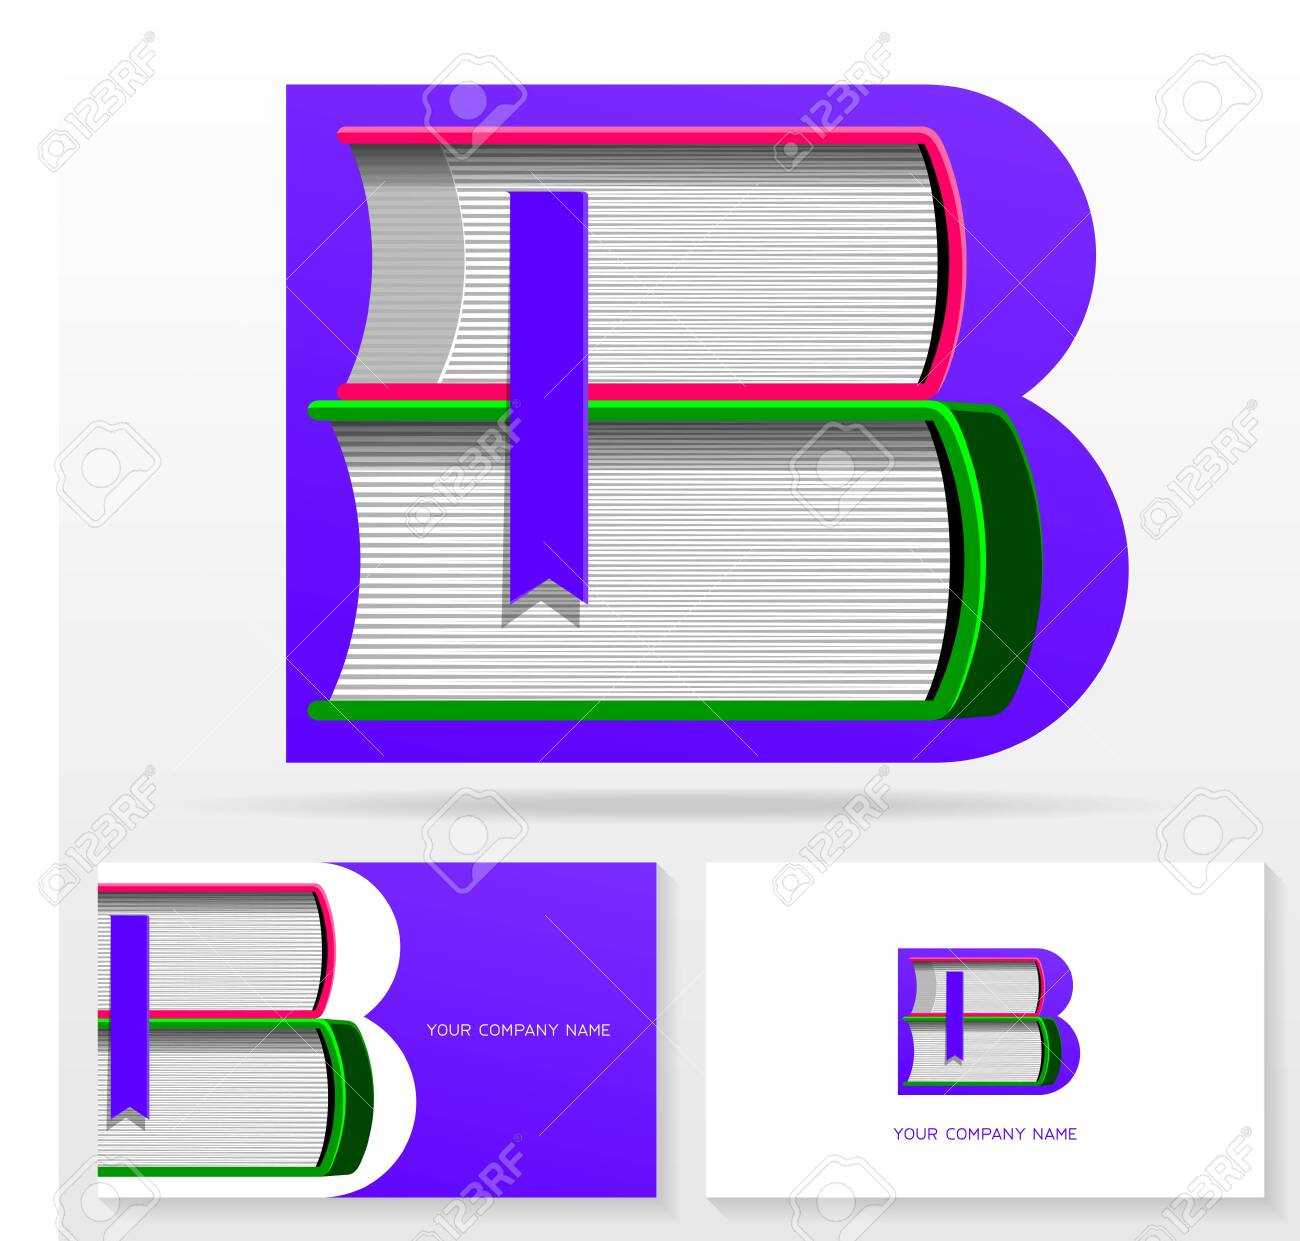 Letter B Logo Design Template. Letter B Made Of Books. Colorful.. Within Library Catalog Card Template